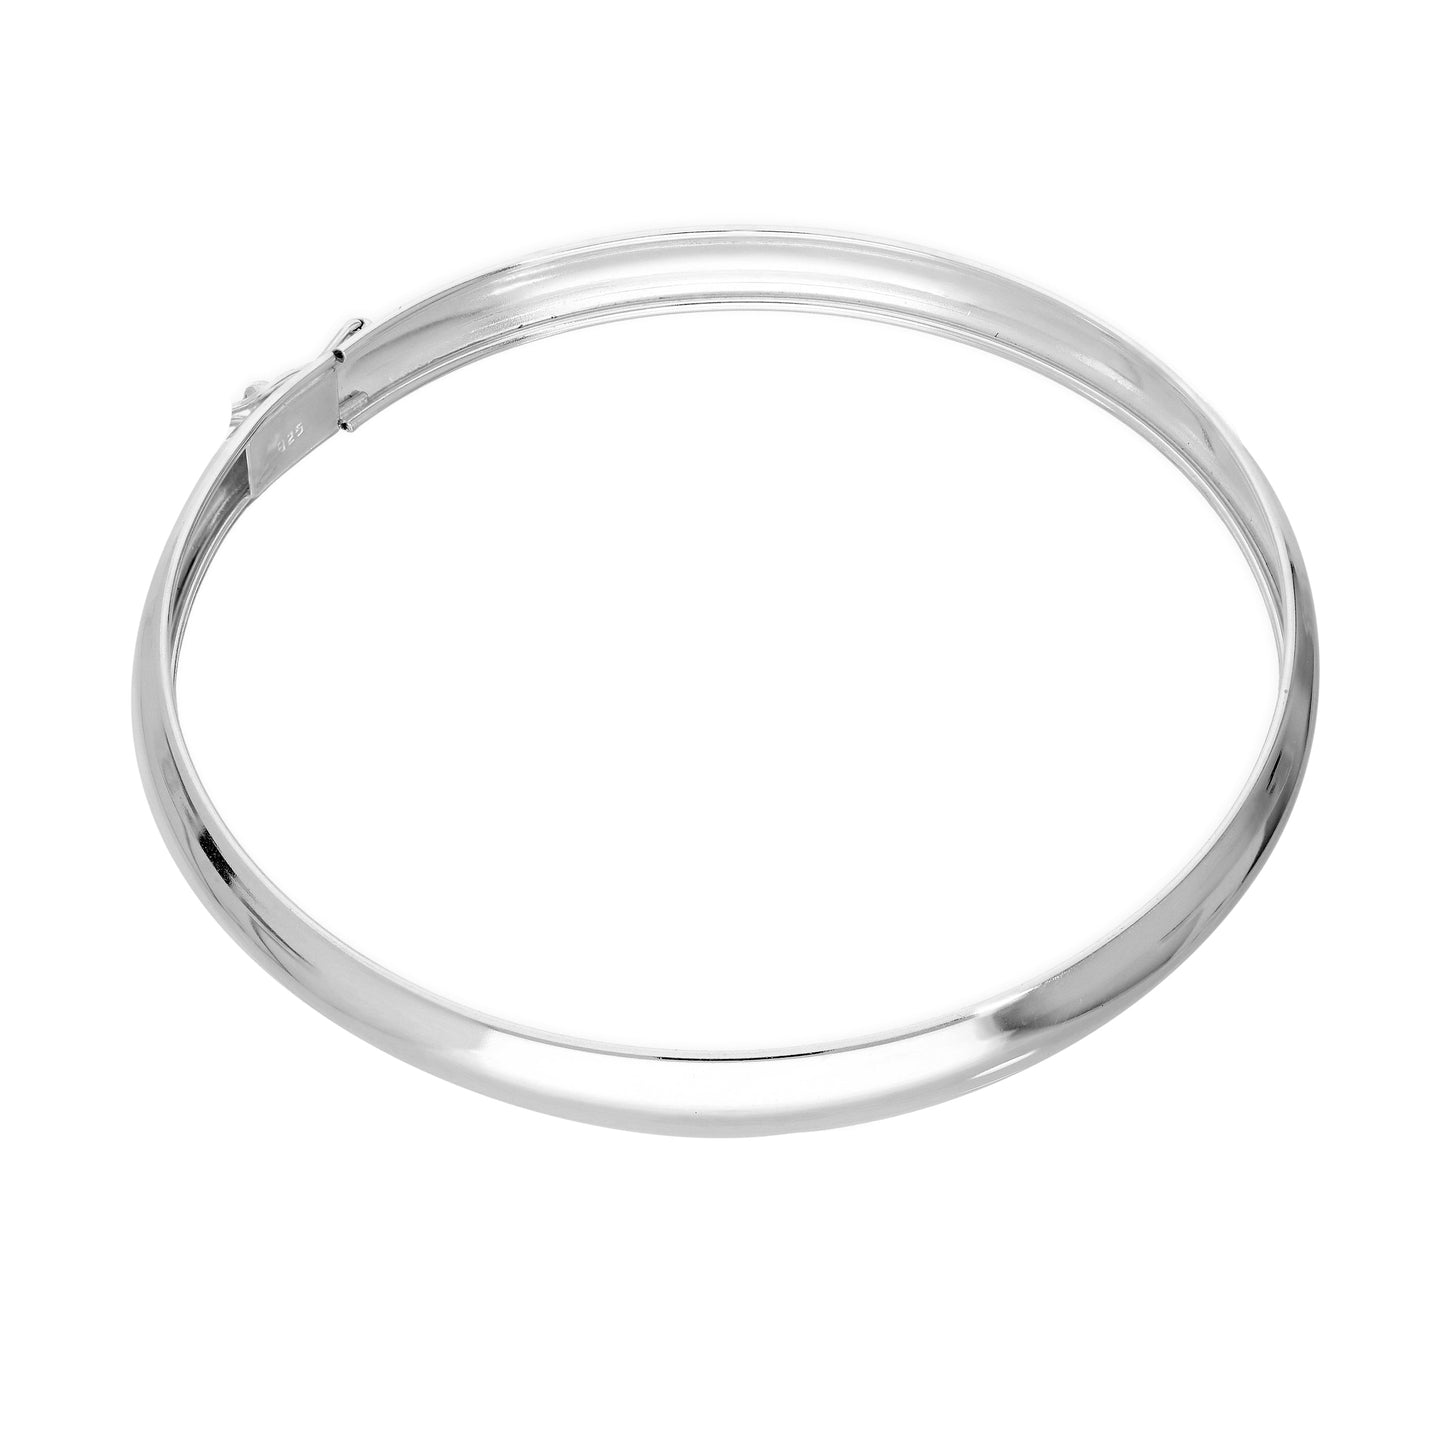 Sterling Silver 65mm Adult Hinged Bangle